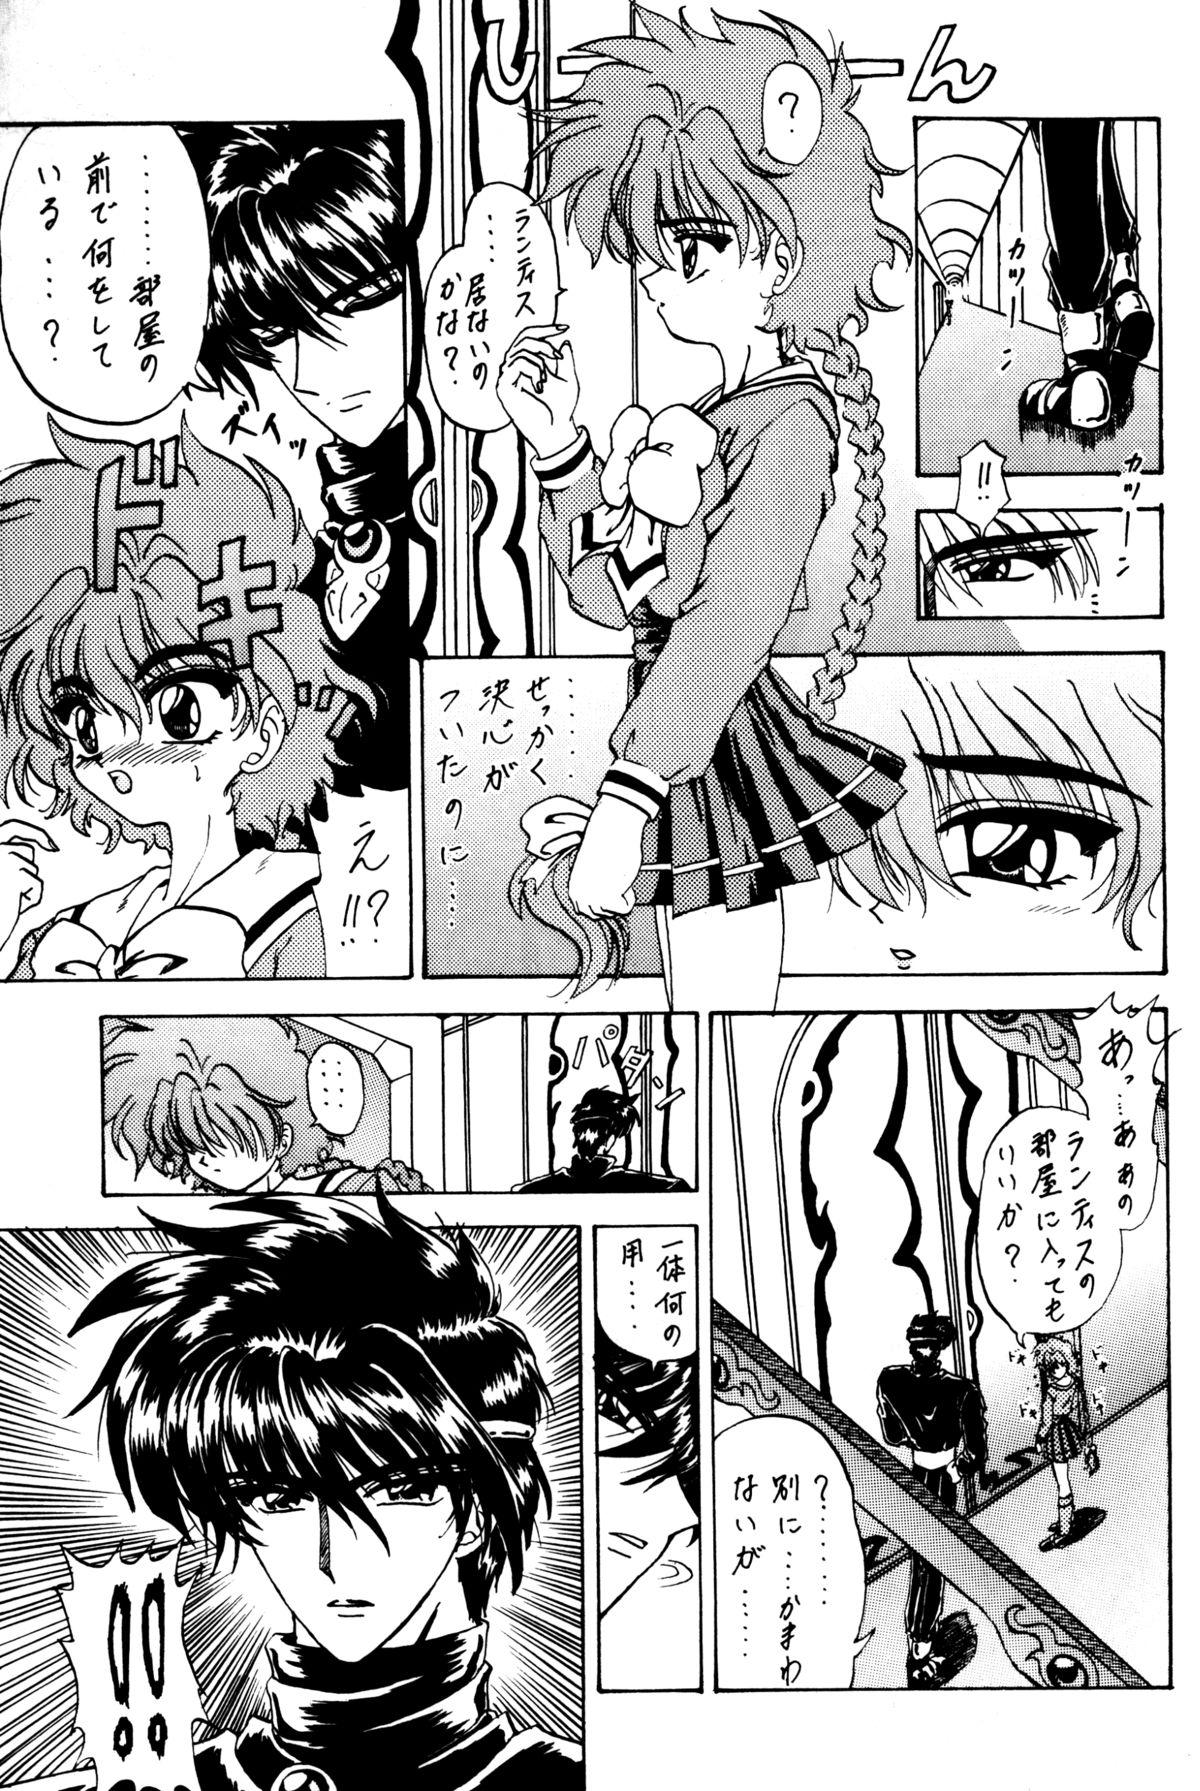 Petite Girl Porn Stale World II - Magic knight rayearth Ejaculation - Page 12